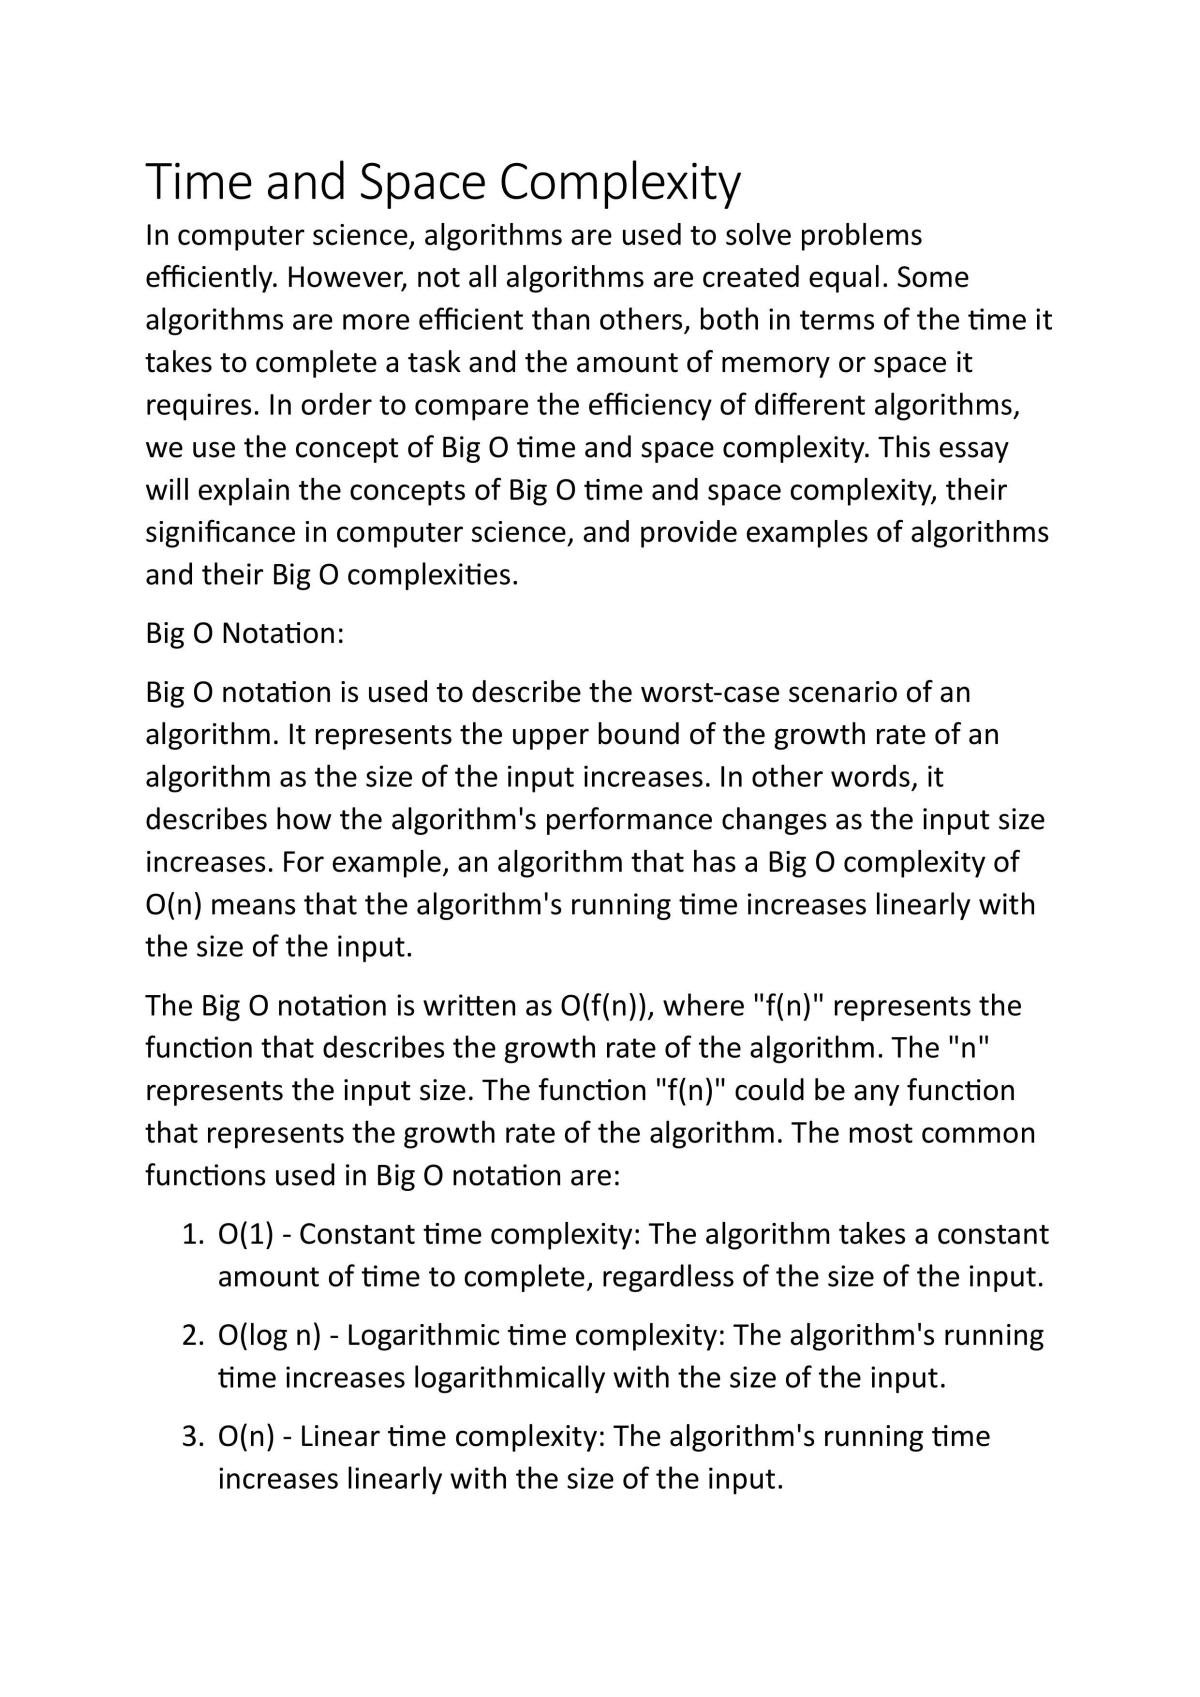 Time and Space Complexity Essay - Page 1